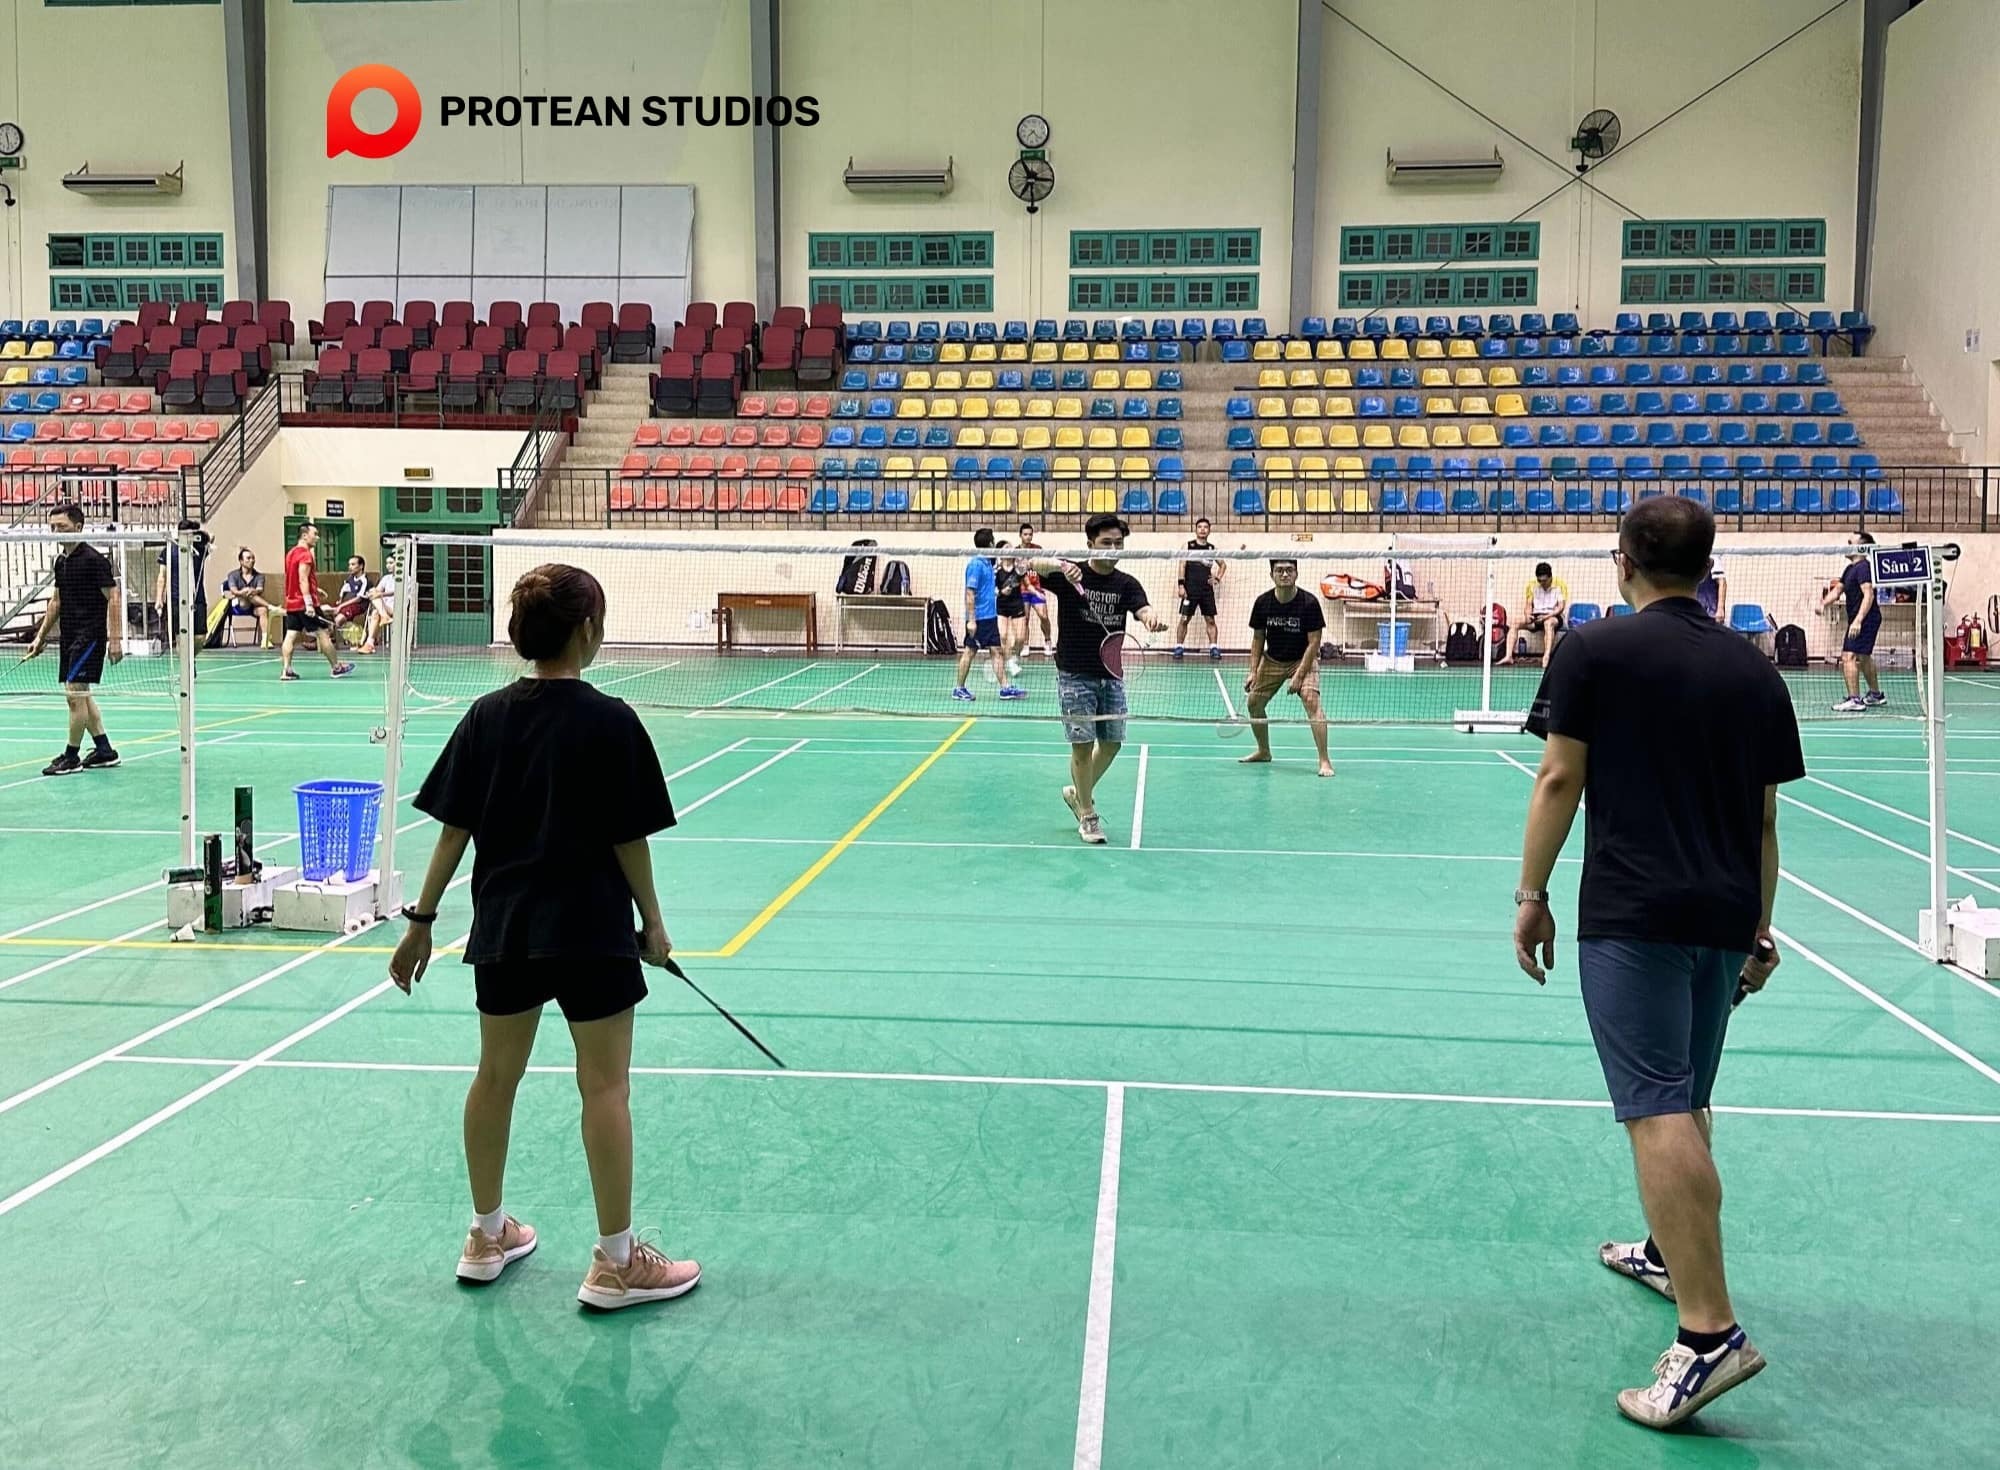 Employees engage in regular badminton sessions